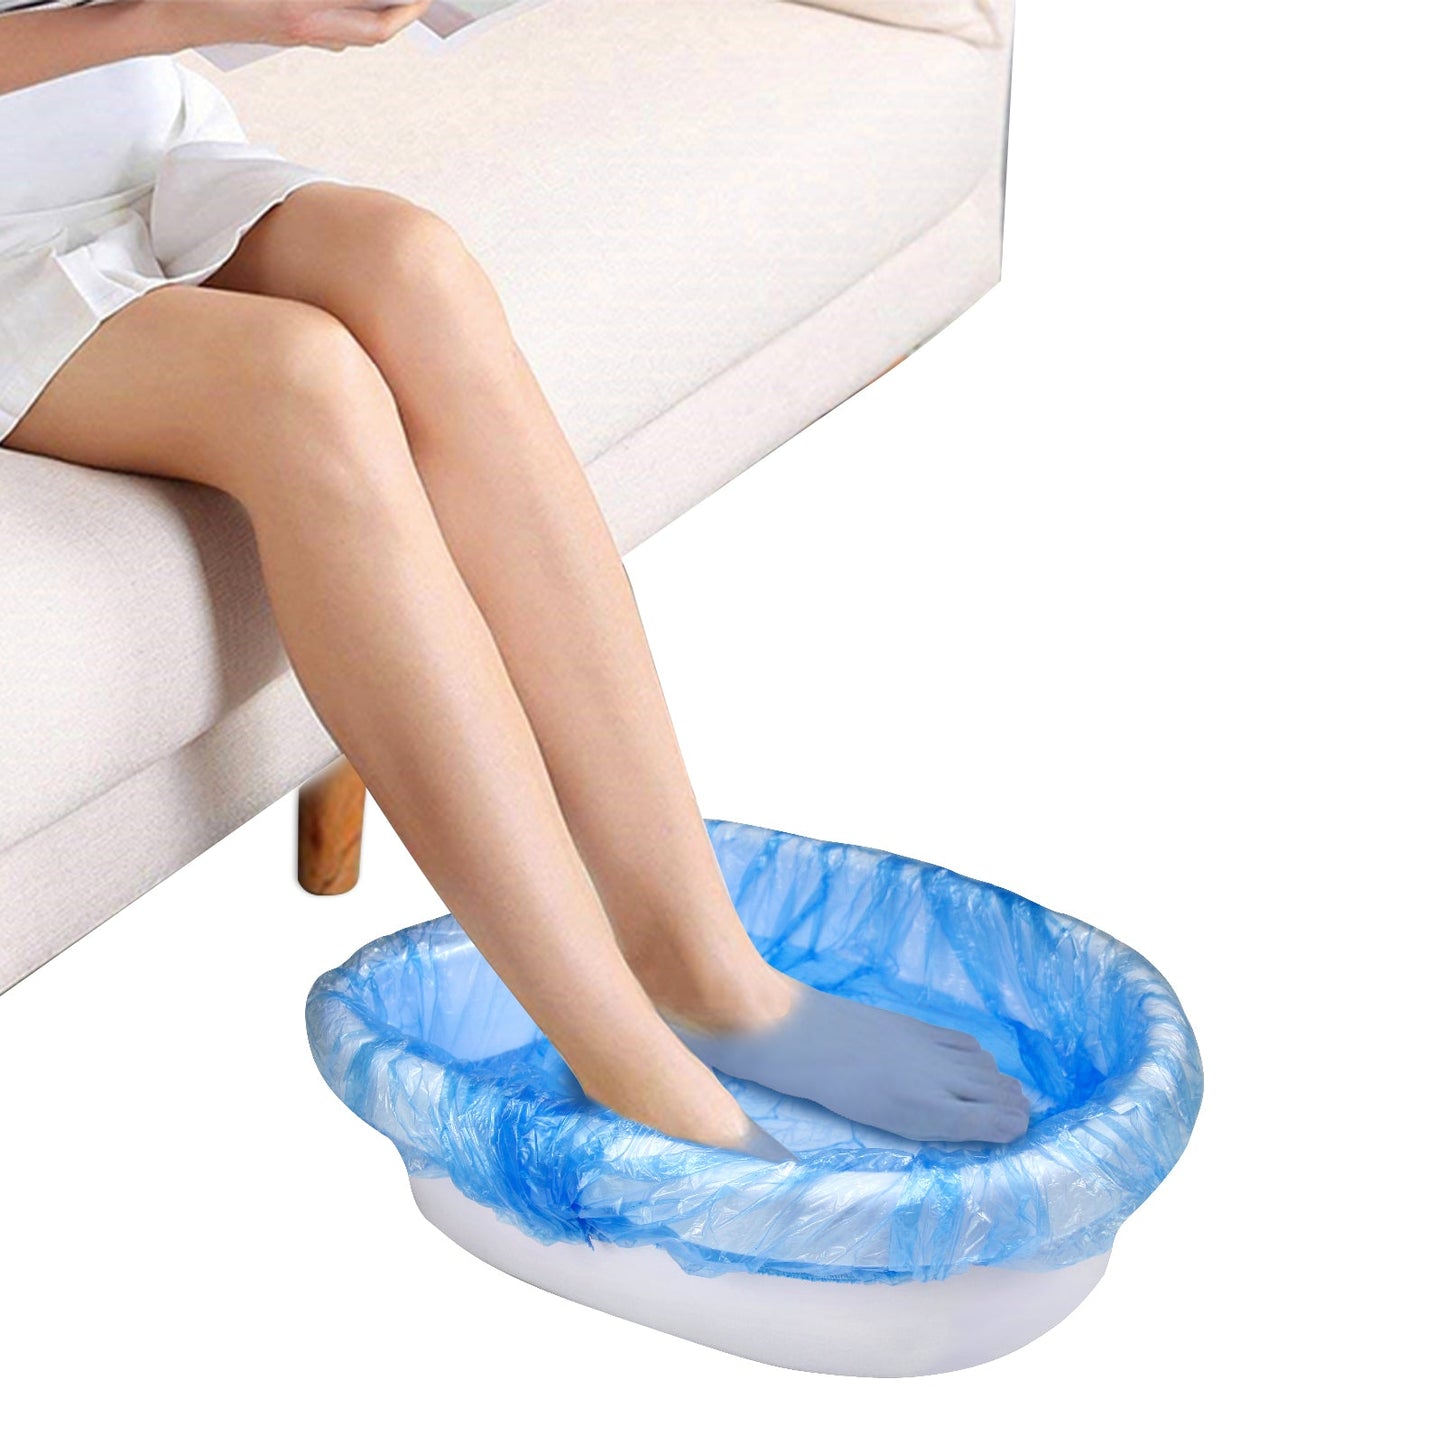 Ionic Foot Spa - At-Home Detox And Cleanse